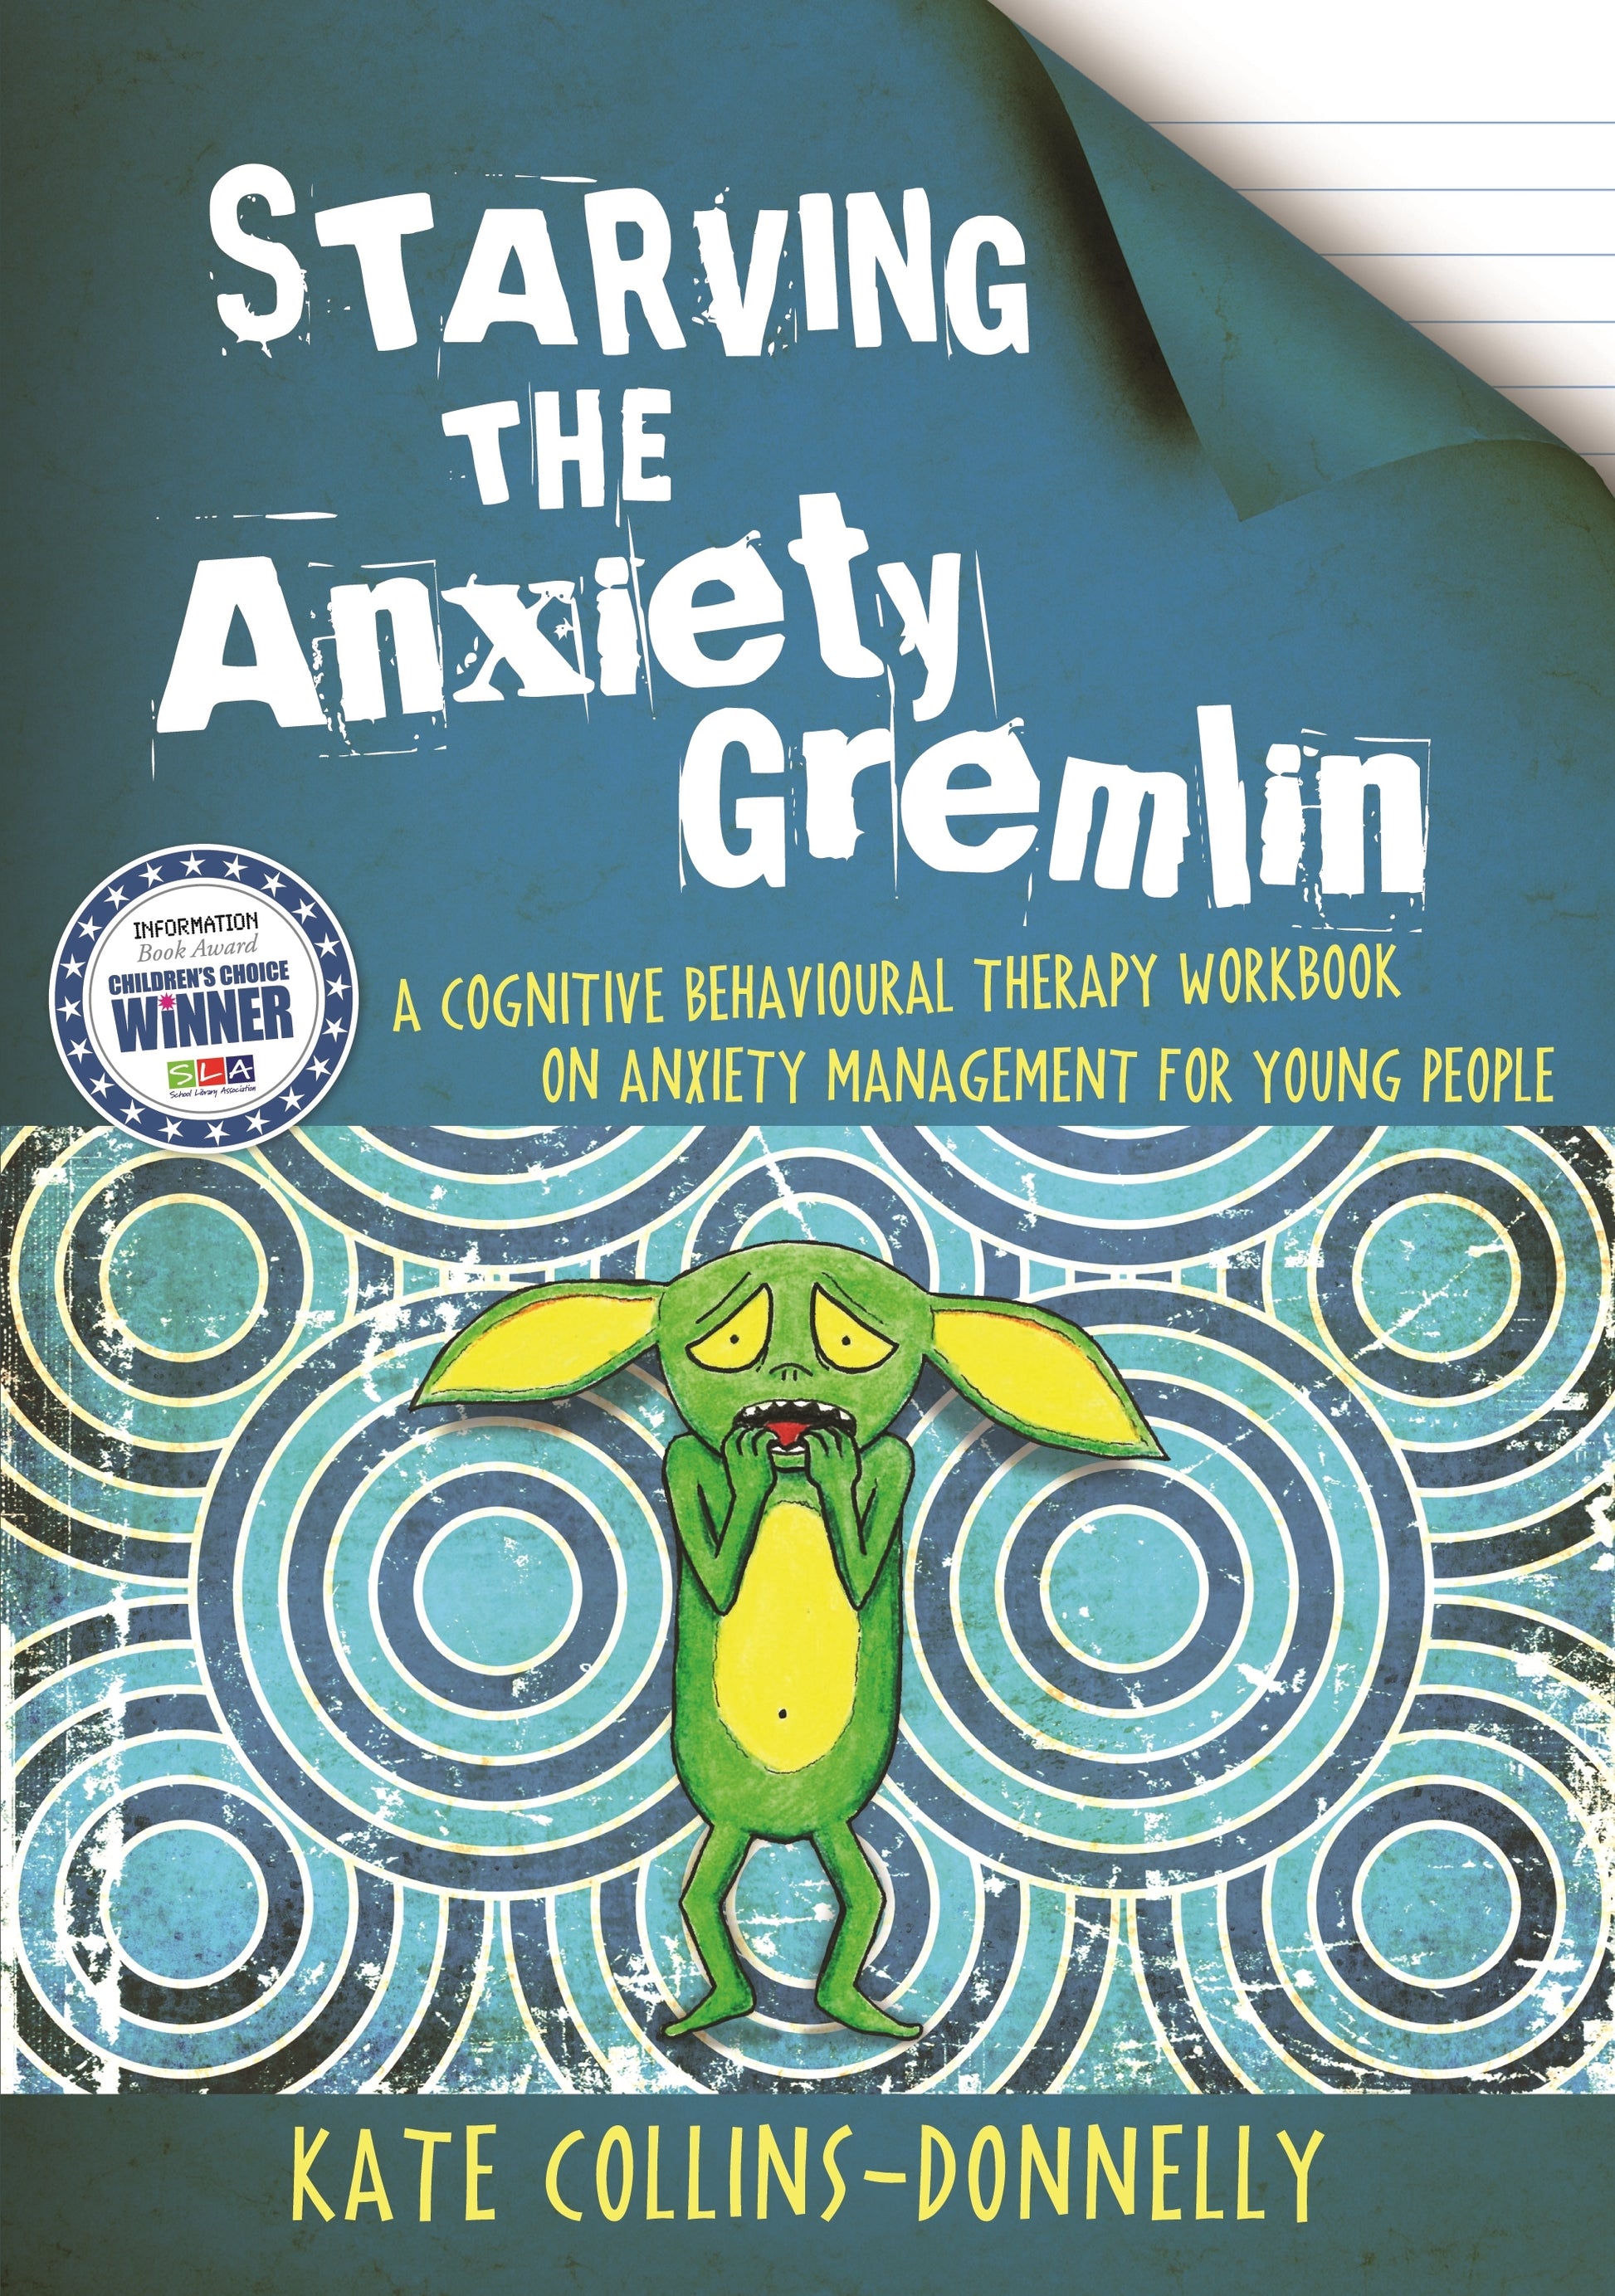 Starving the Anxiety Gremlin by Kate Collins-Donnelly